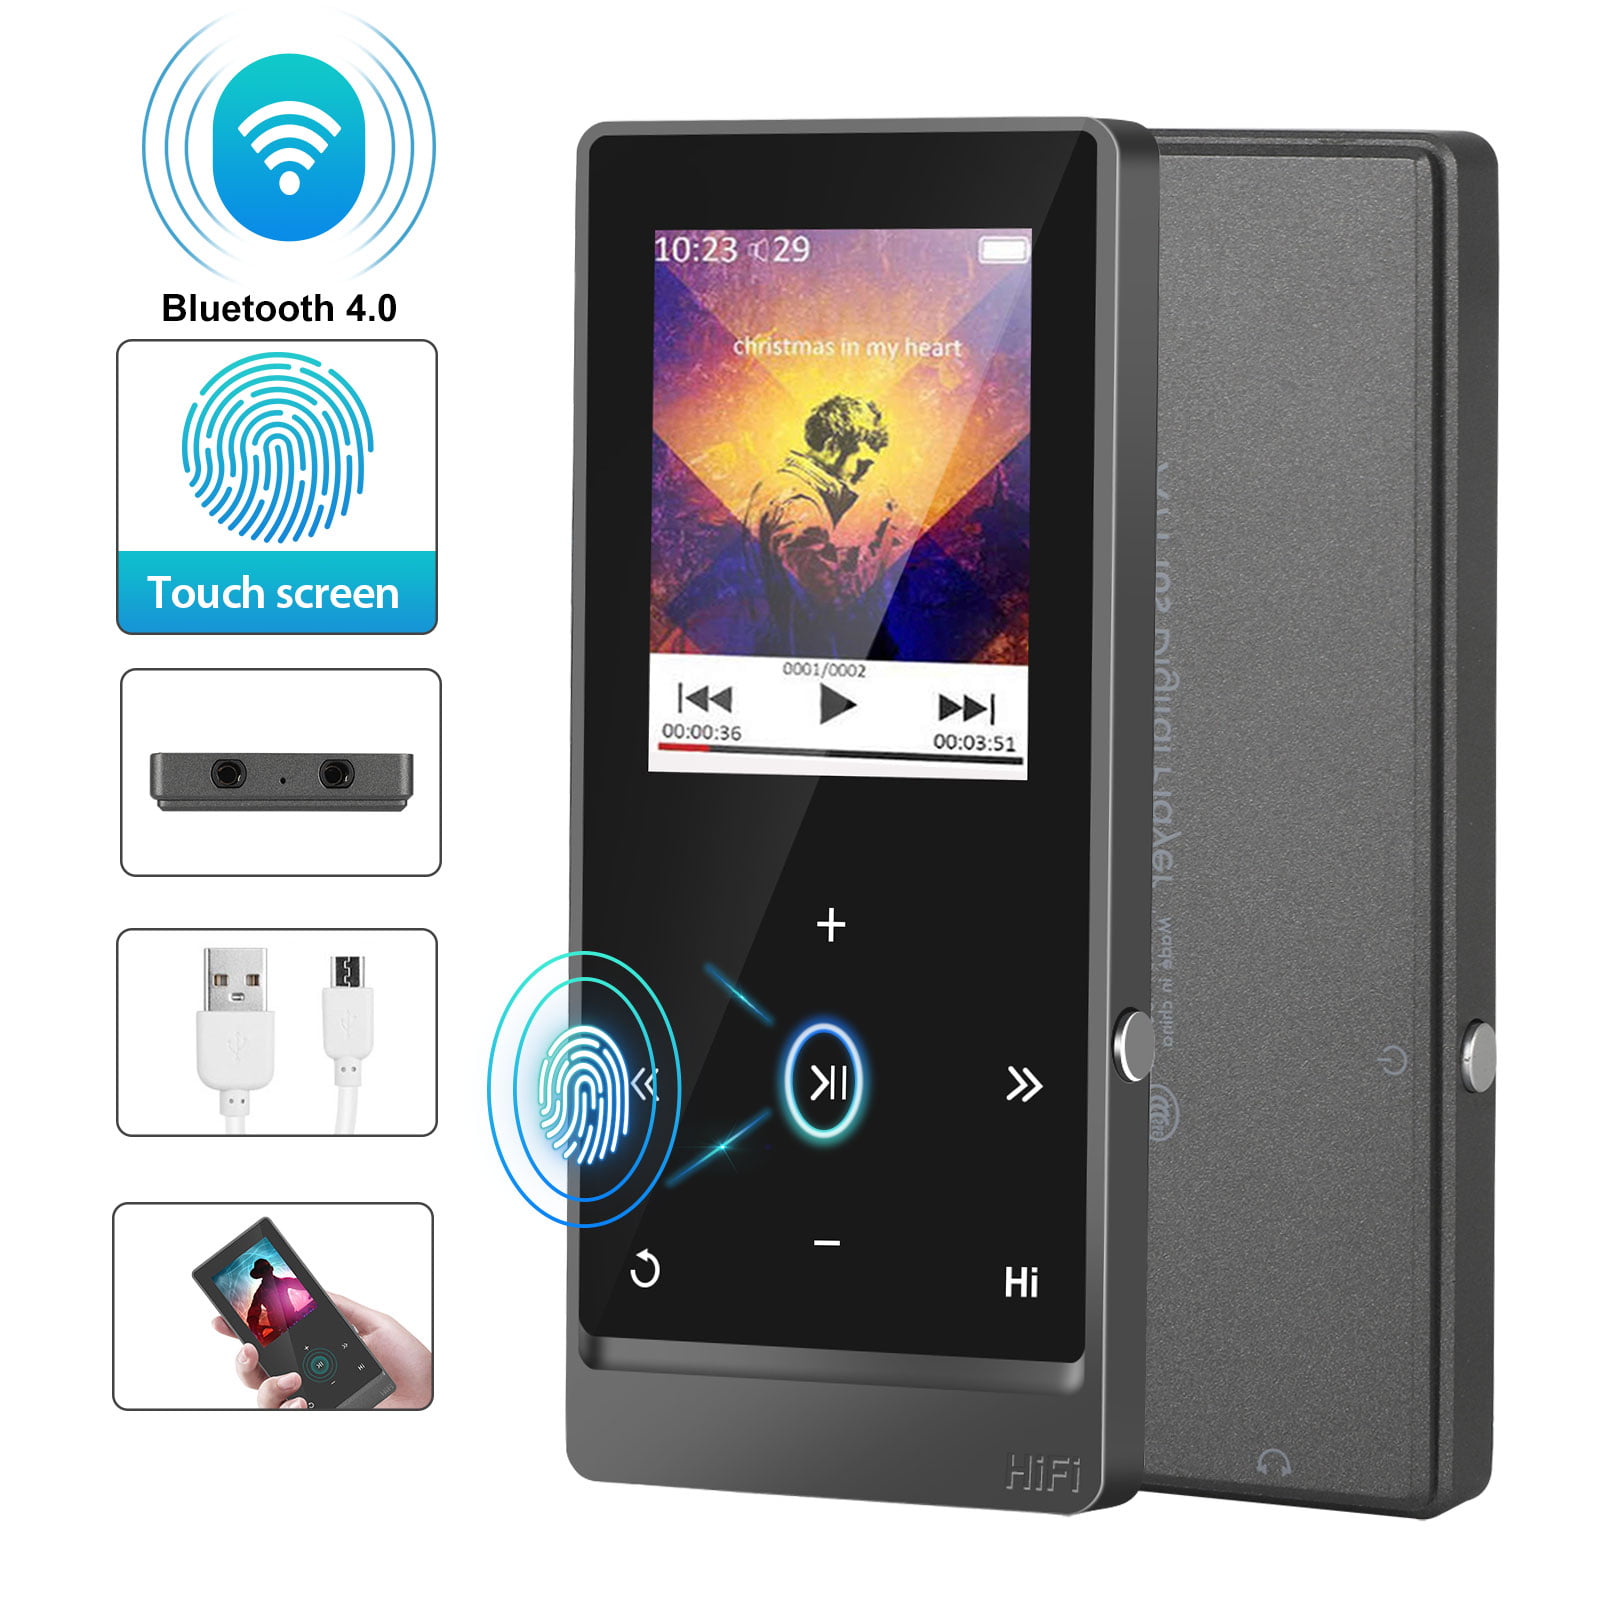 TSV 8GB MP3 Player with 4.0 Bluetooth, Portable Lossless Sound MP3 ...